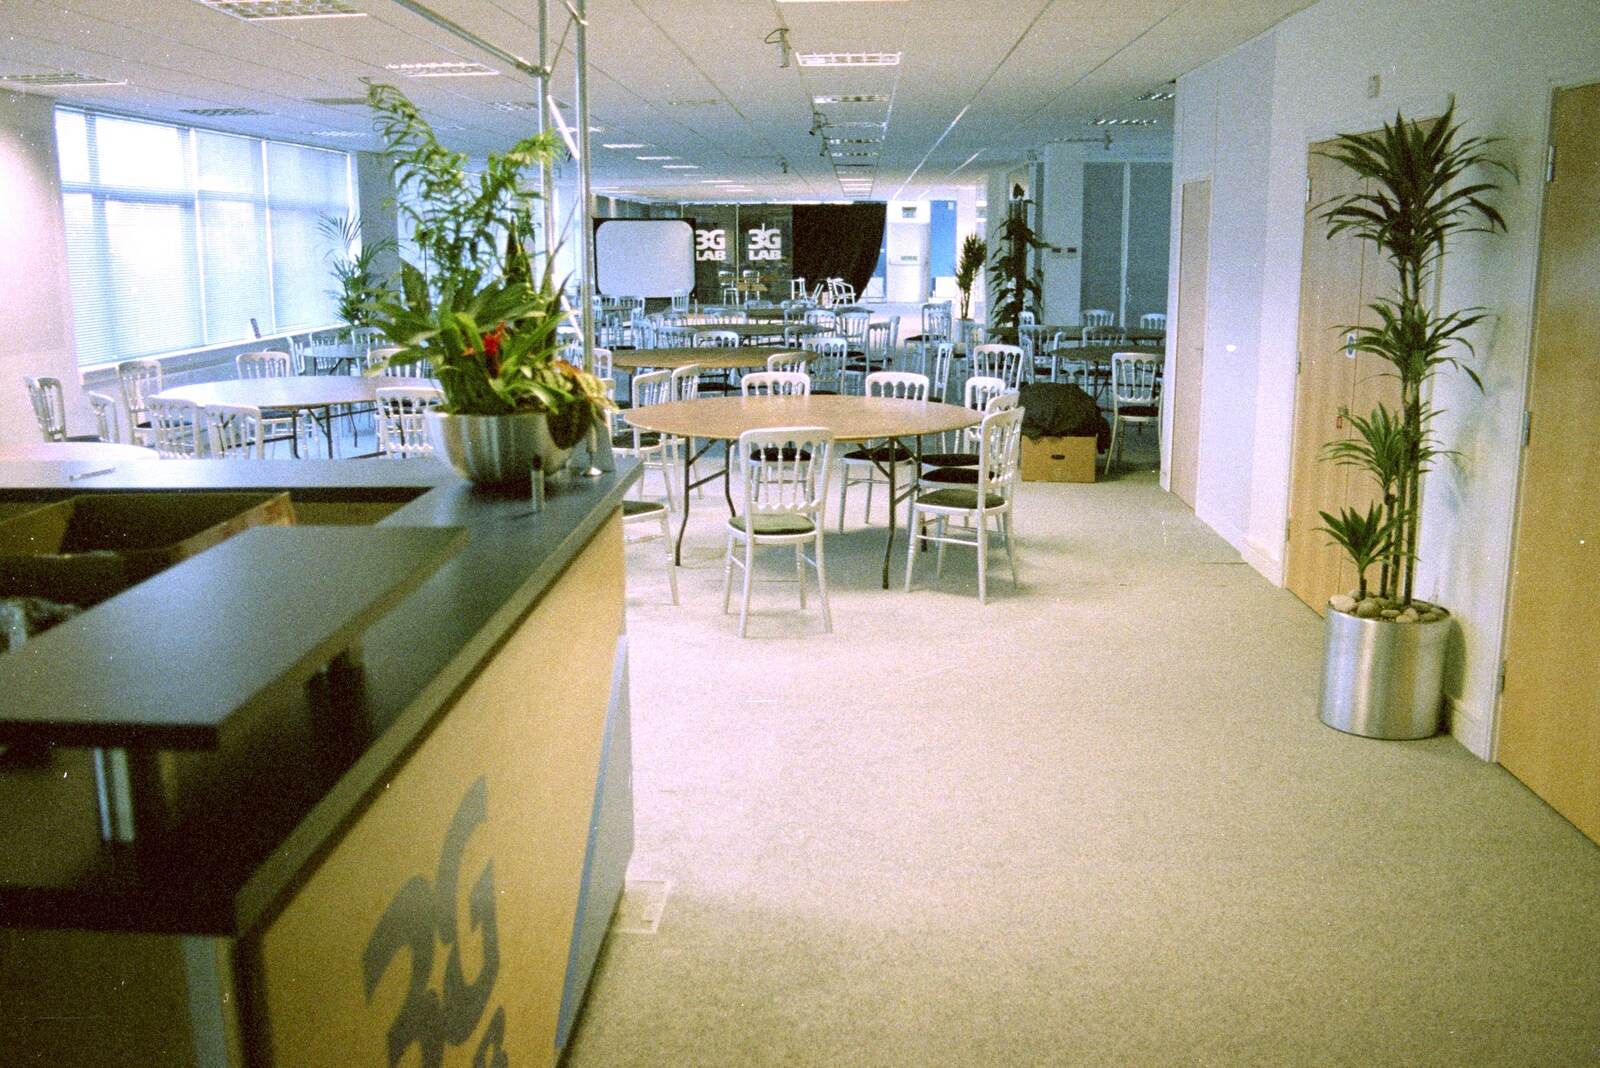 3G Lab's new office from 3G Lab Moves Offices, Milton Road, Cambourne and Cambridge - 27th August 2001